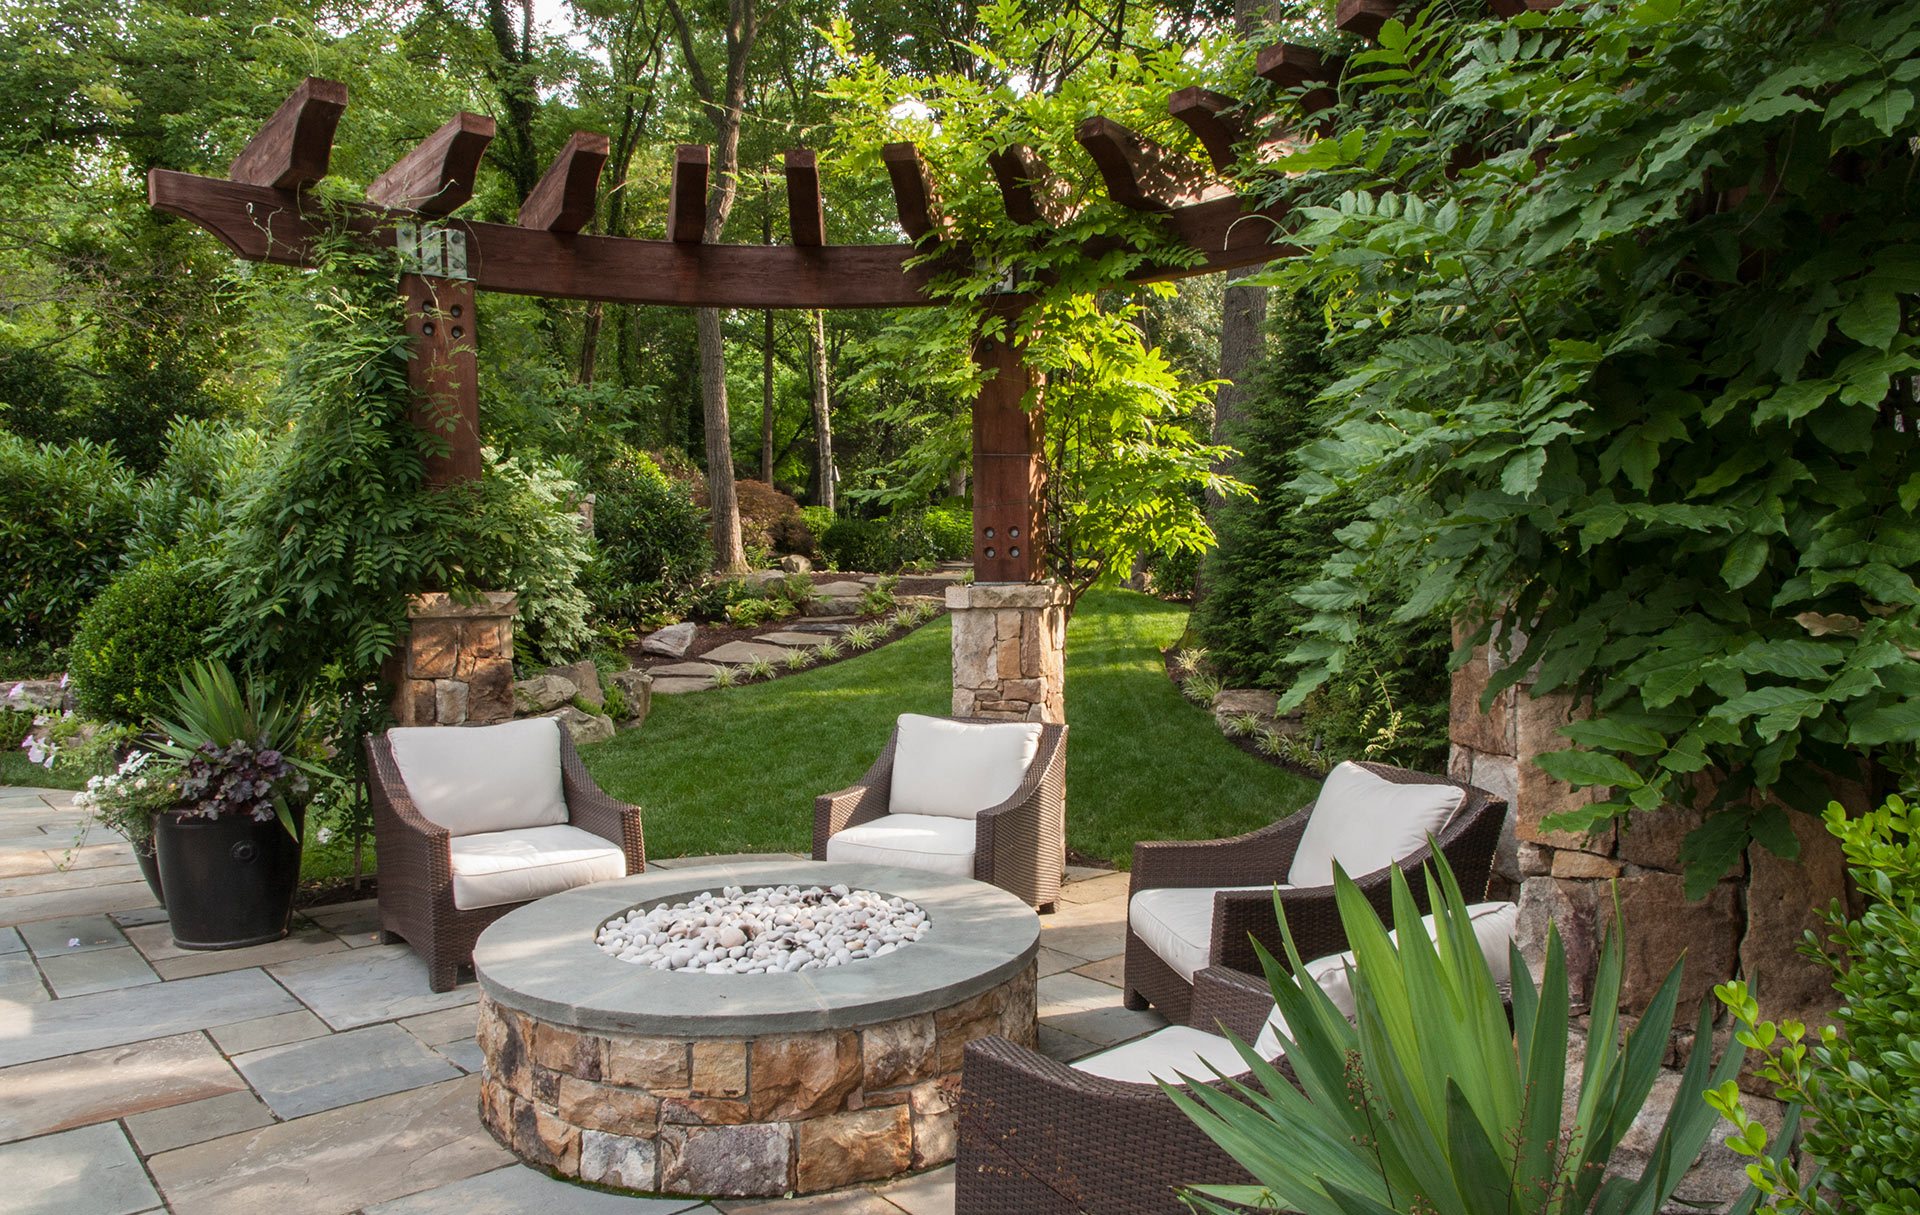 Lush green backyard with paved area with a round firepit and 4 surrounding chairs